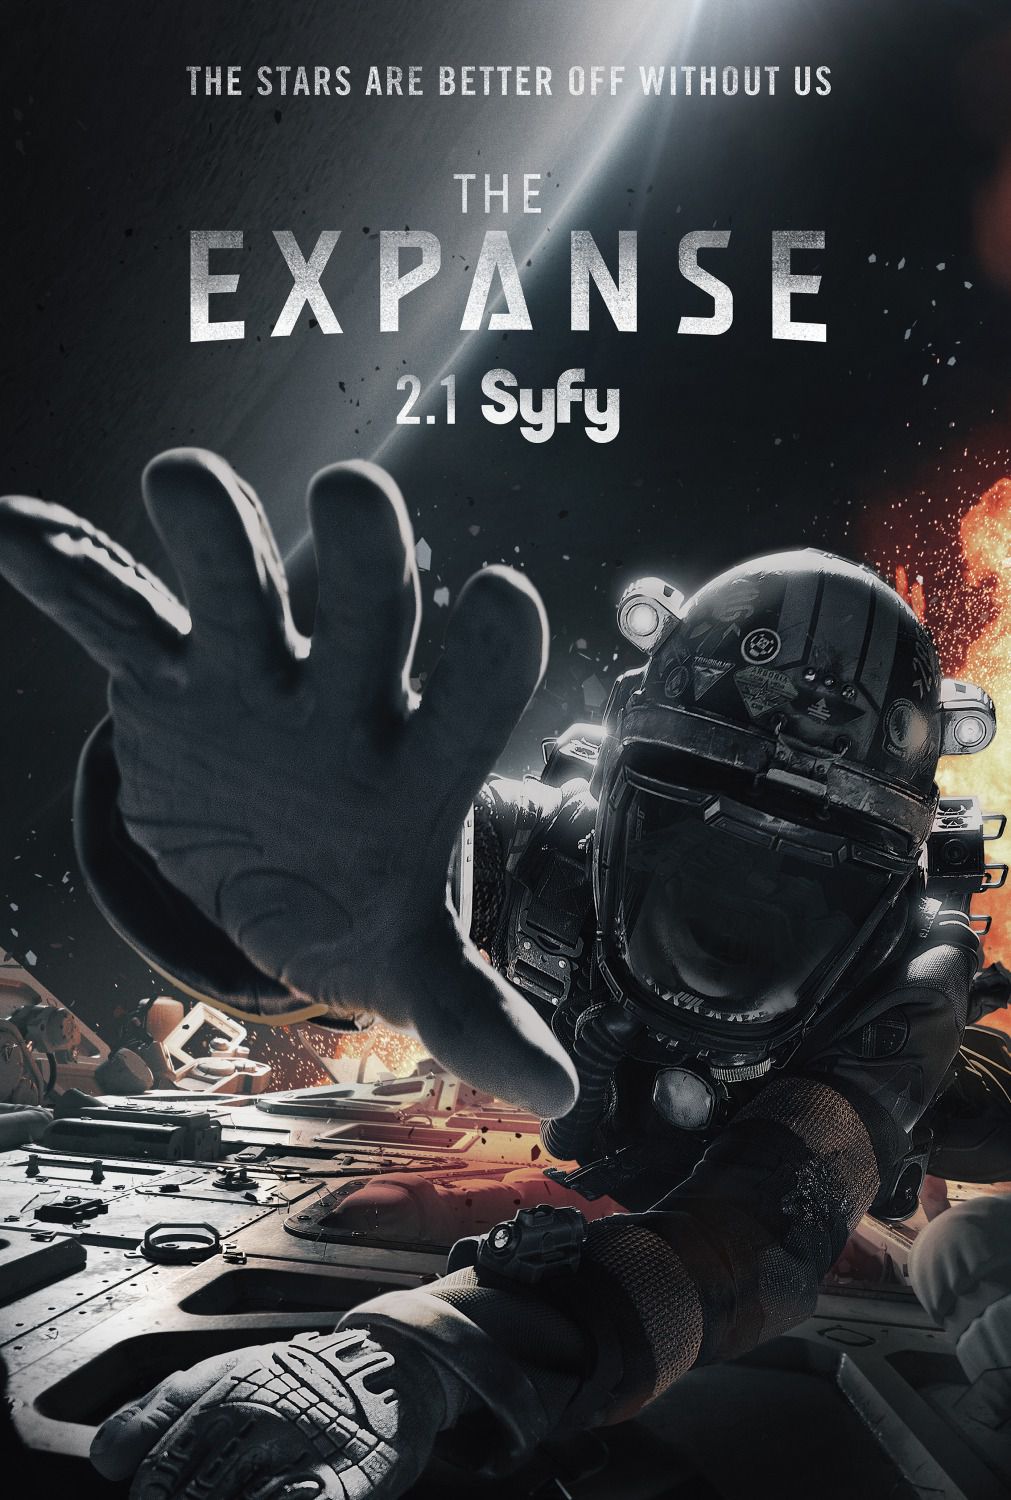 The Expanse - Série (2015) streaming VF gratuit complet